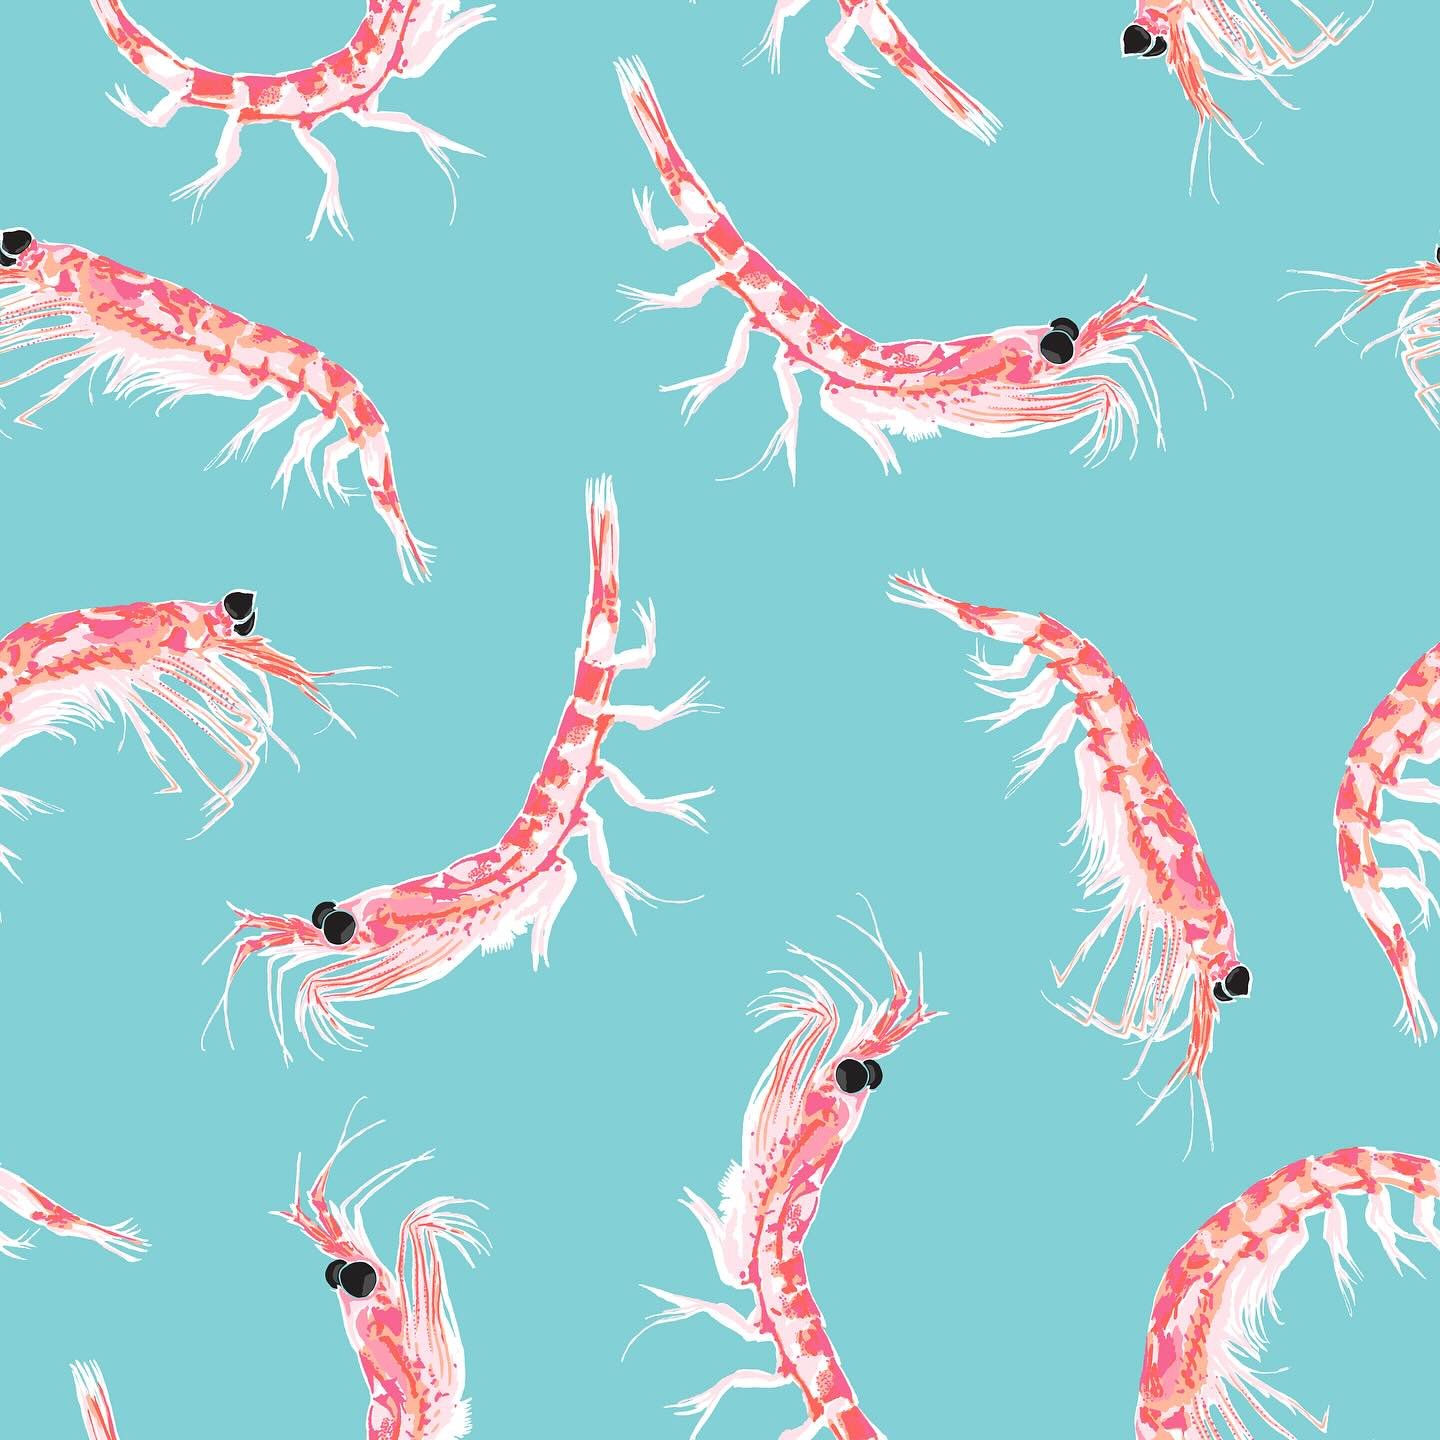 I&rsquo;ve seen so many elegant and sophisticated designs being entered into this weeks &ldquo;Crustacean-Core&rdquo; Spoonflower challenge, and I&rsquo;d be lying if I said I wasn&rsquo;t second guessing my own entry, which is definitely not either 